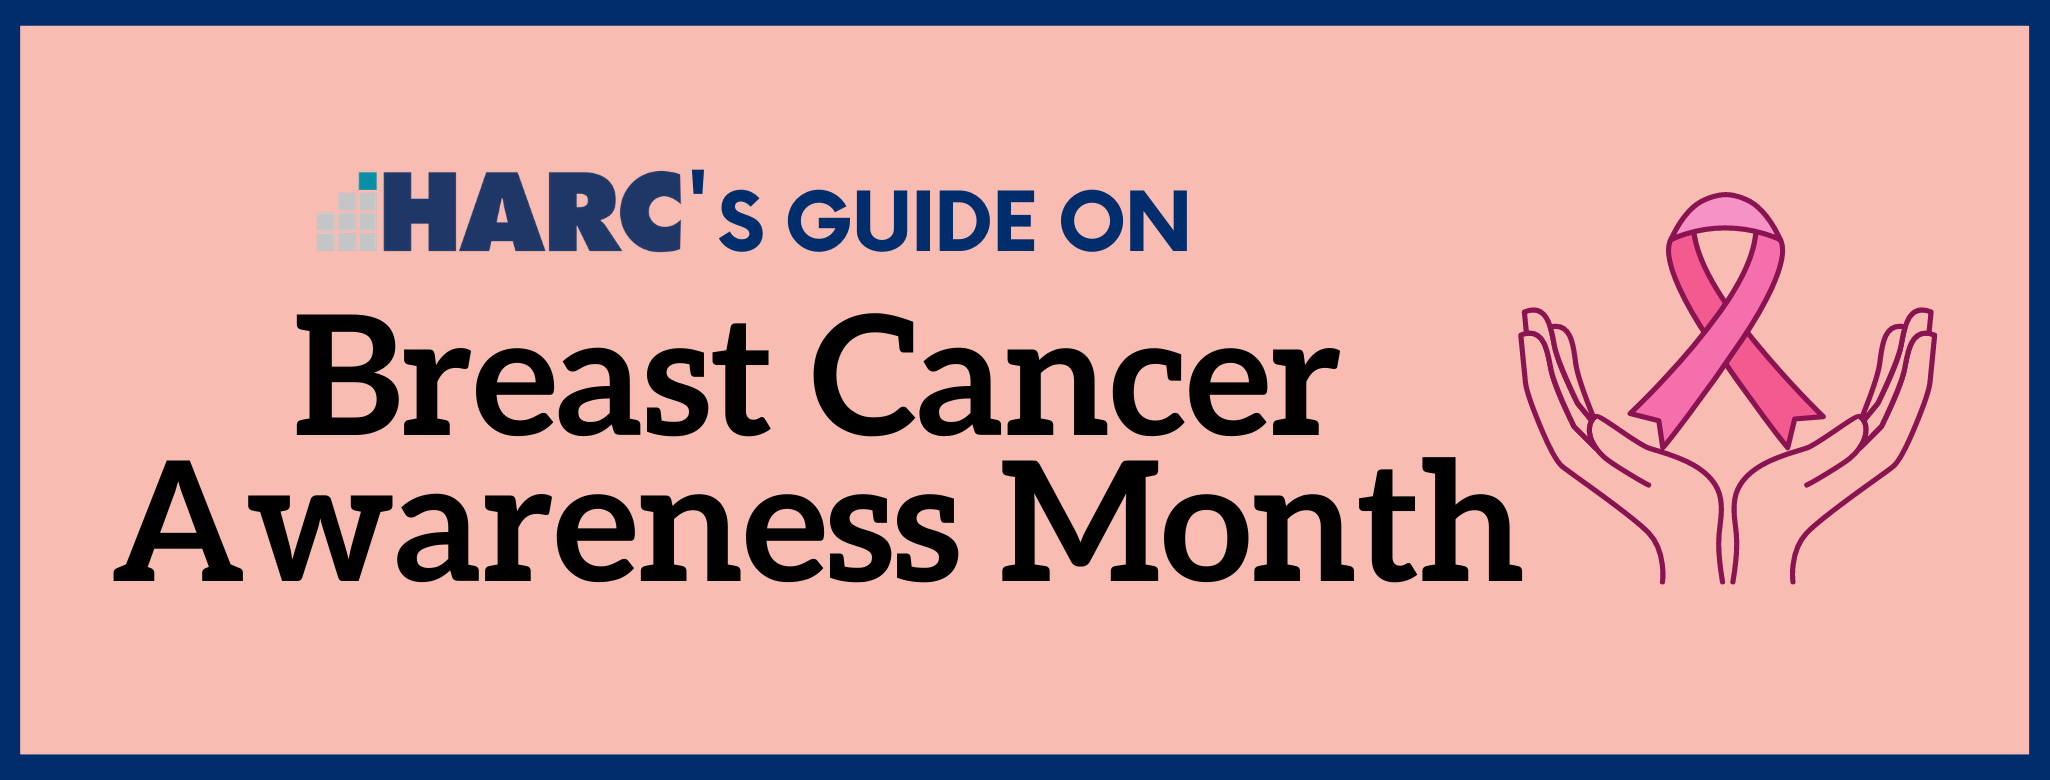 HARC's Guide On Breast Cancer Awareness Month